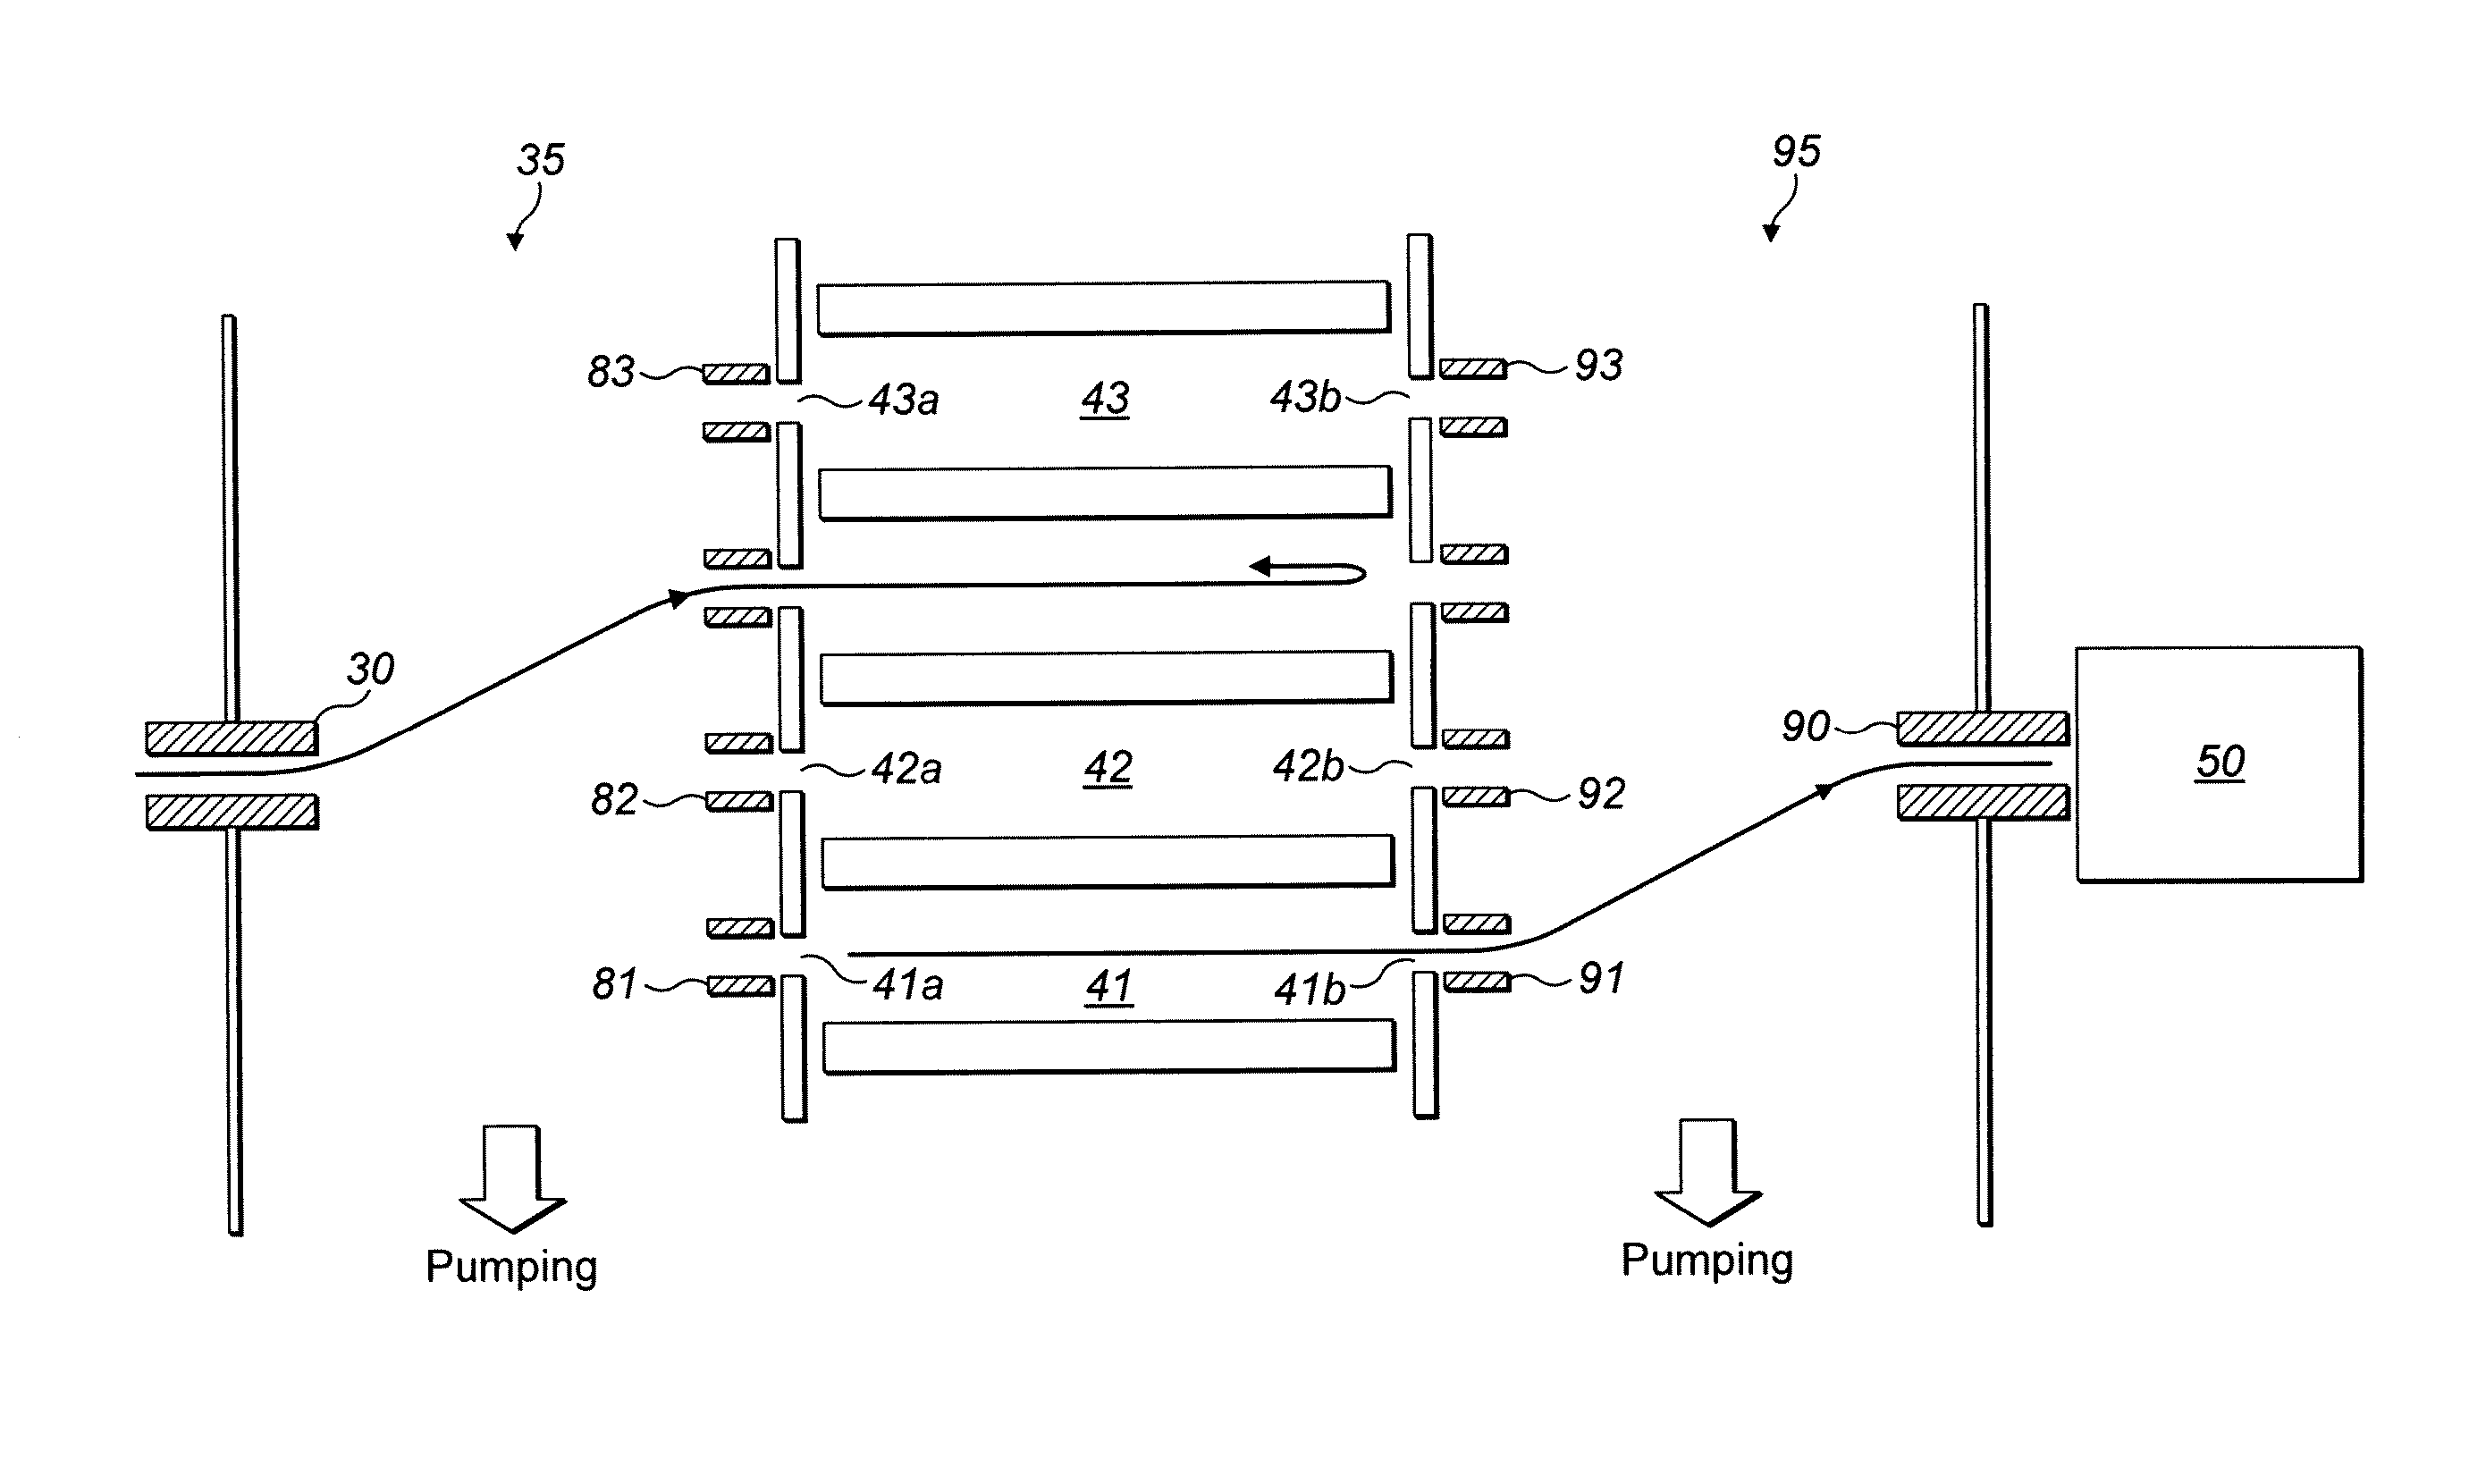 Collision cell for tandem mass spectrometry